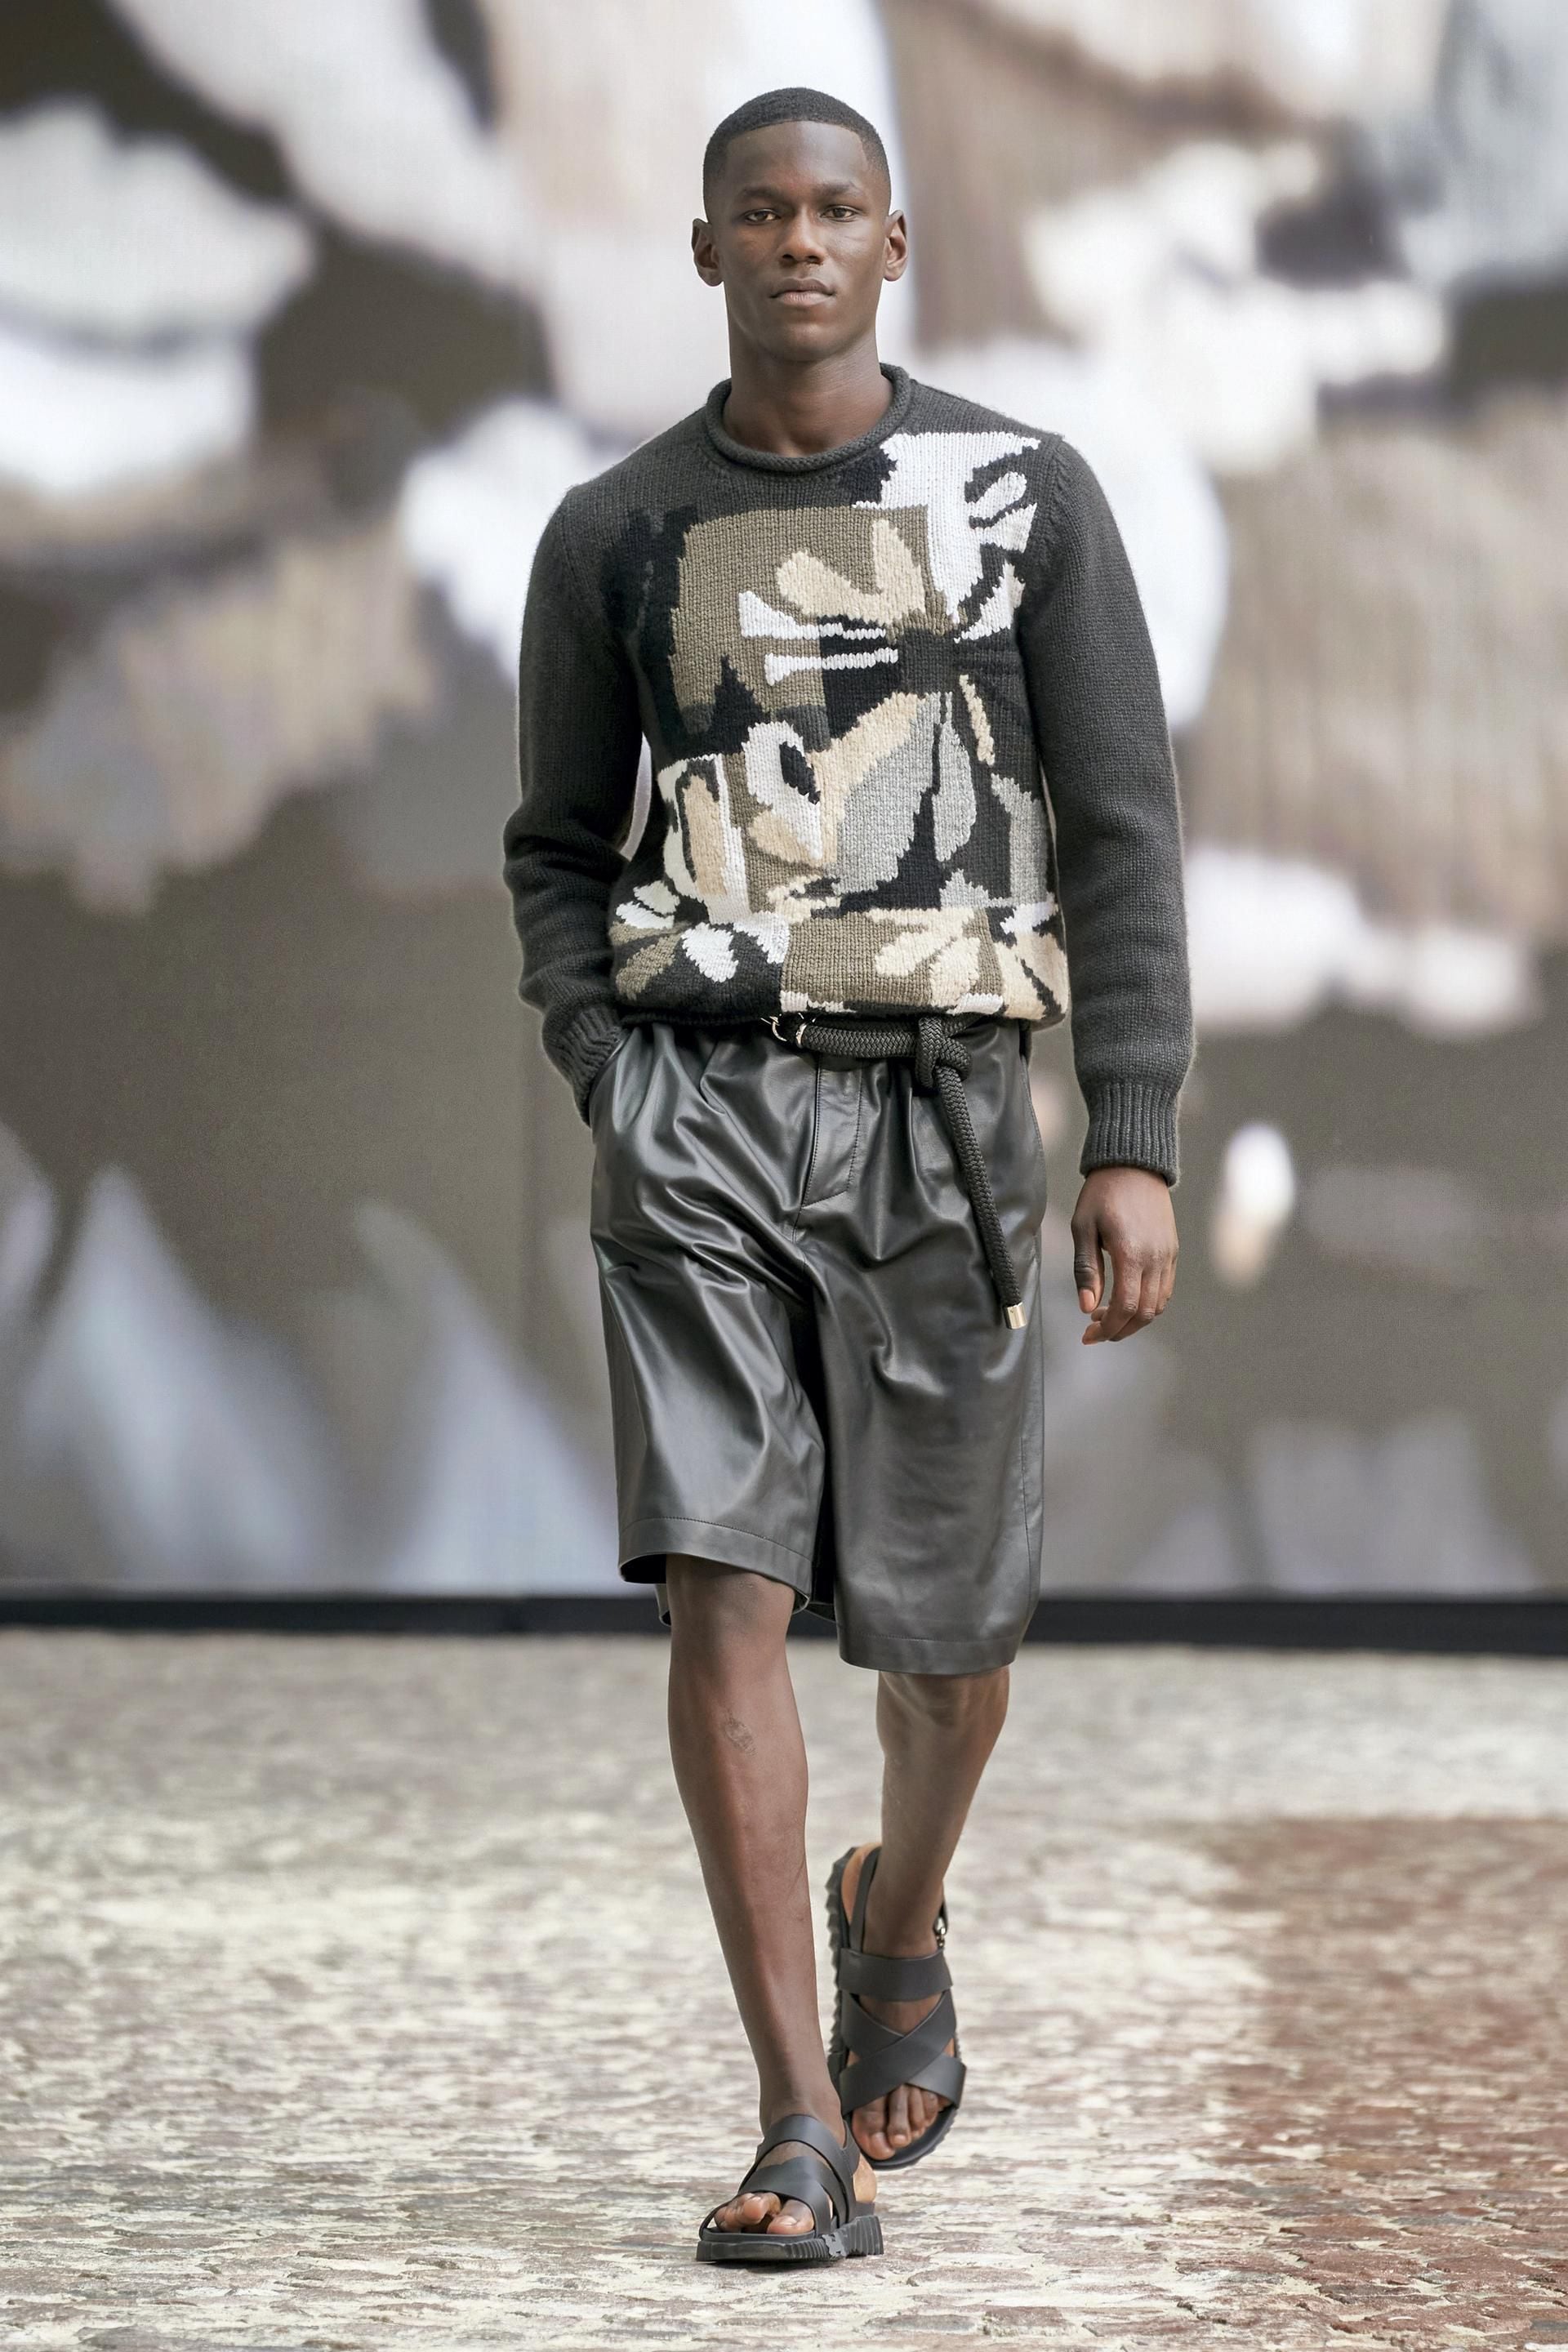 Dior, Louis Vuitton and Hermes deliver powerful men's shows for